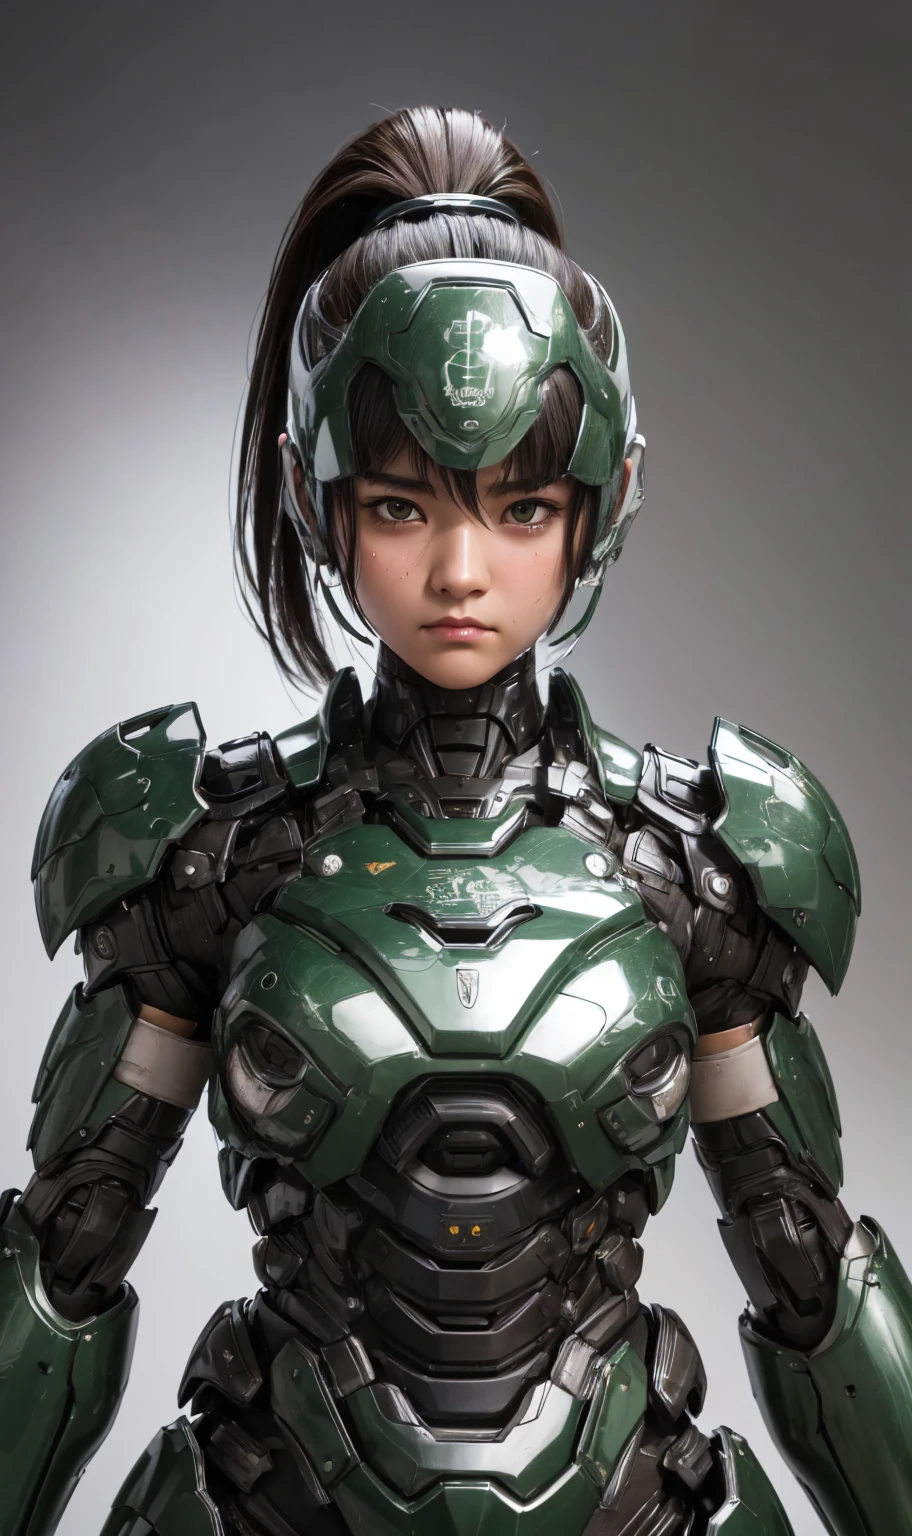 Textured skin, Super detailed, Attention to detail, high quality, 最high quality, High resolution, 1080P, hard disk, beautiful,(War Machine),Beautiful cyborg woman,Dark Green Mecha Cyborg Girl,battle,Girl with a mechanical body,、Plain junior high school girl　ponytail、Sweaty brown eyes、Sweaty face、Expressions of distress　Blushing　cute　Black-haired　((Steam coming out of the head)) (Steam coming out of the whole body) Cool pose